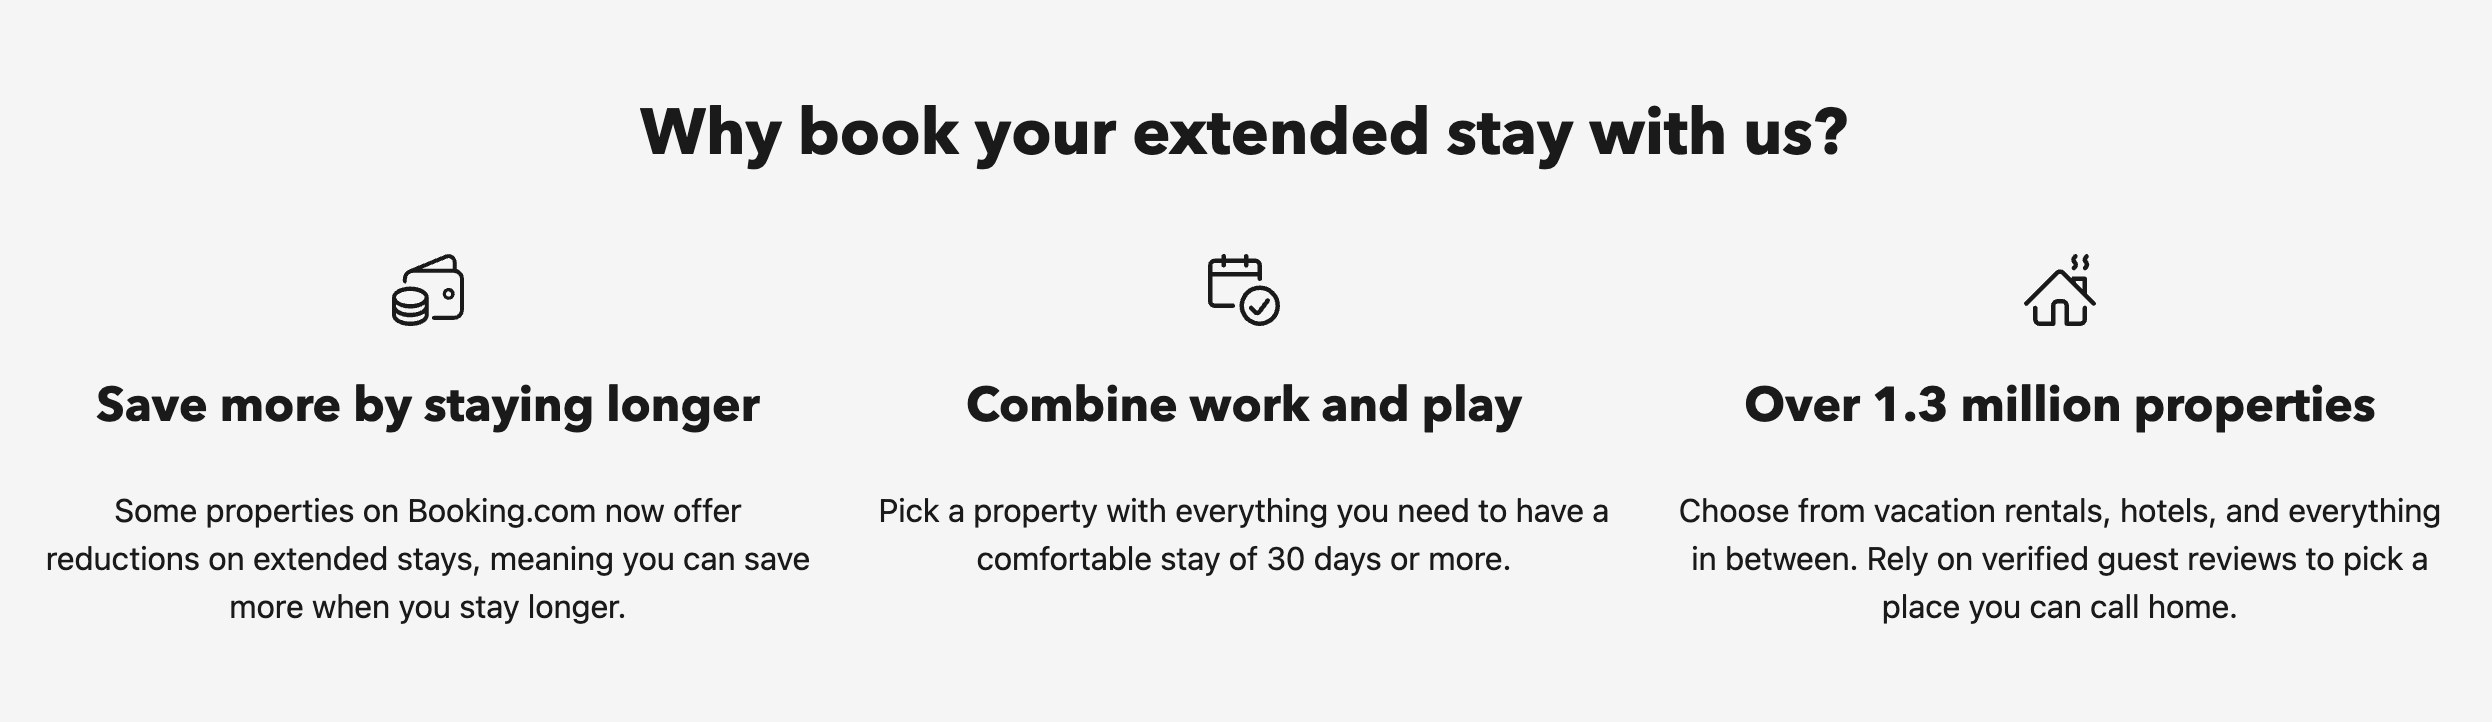 Booking.com extended stay discounts information